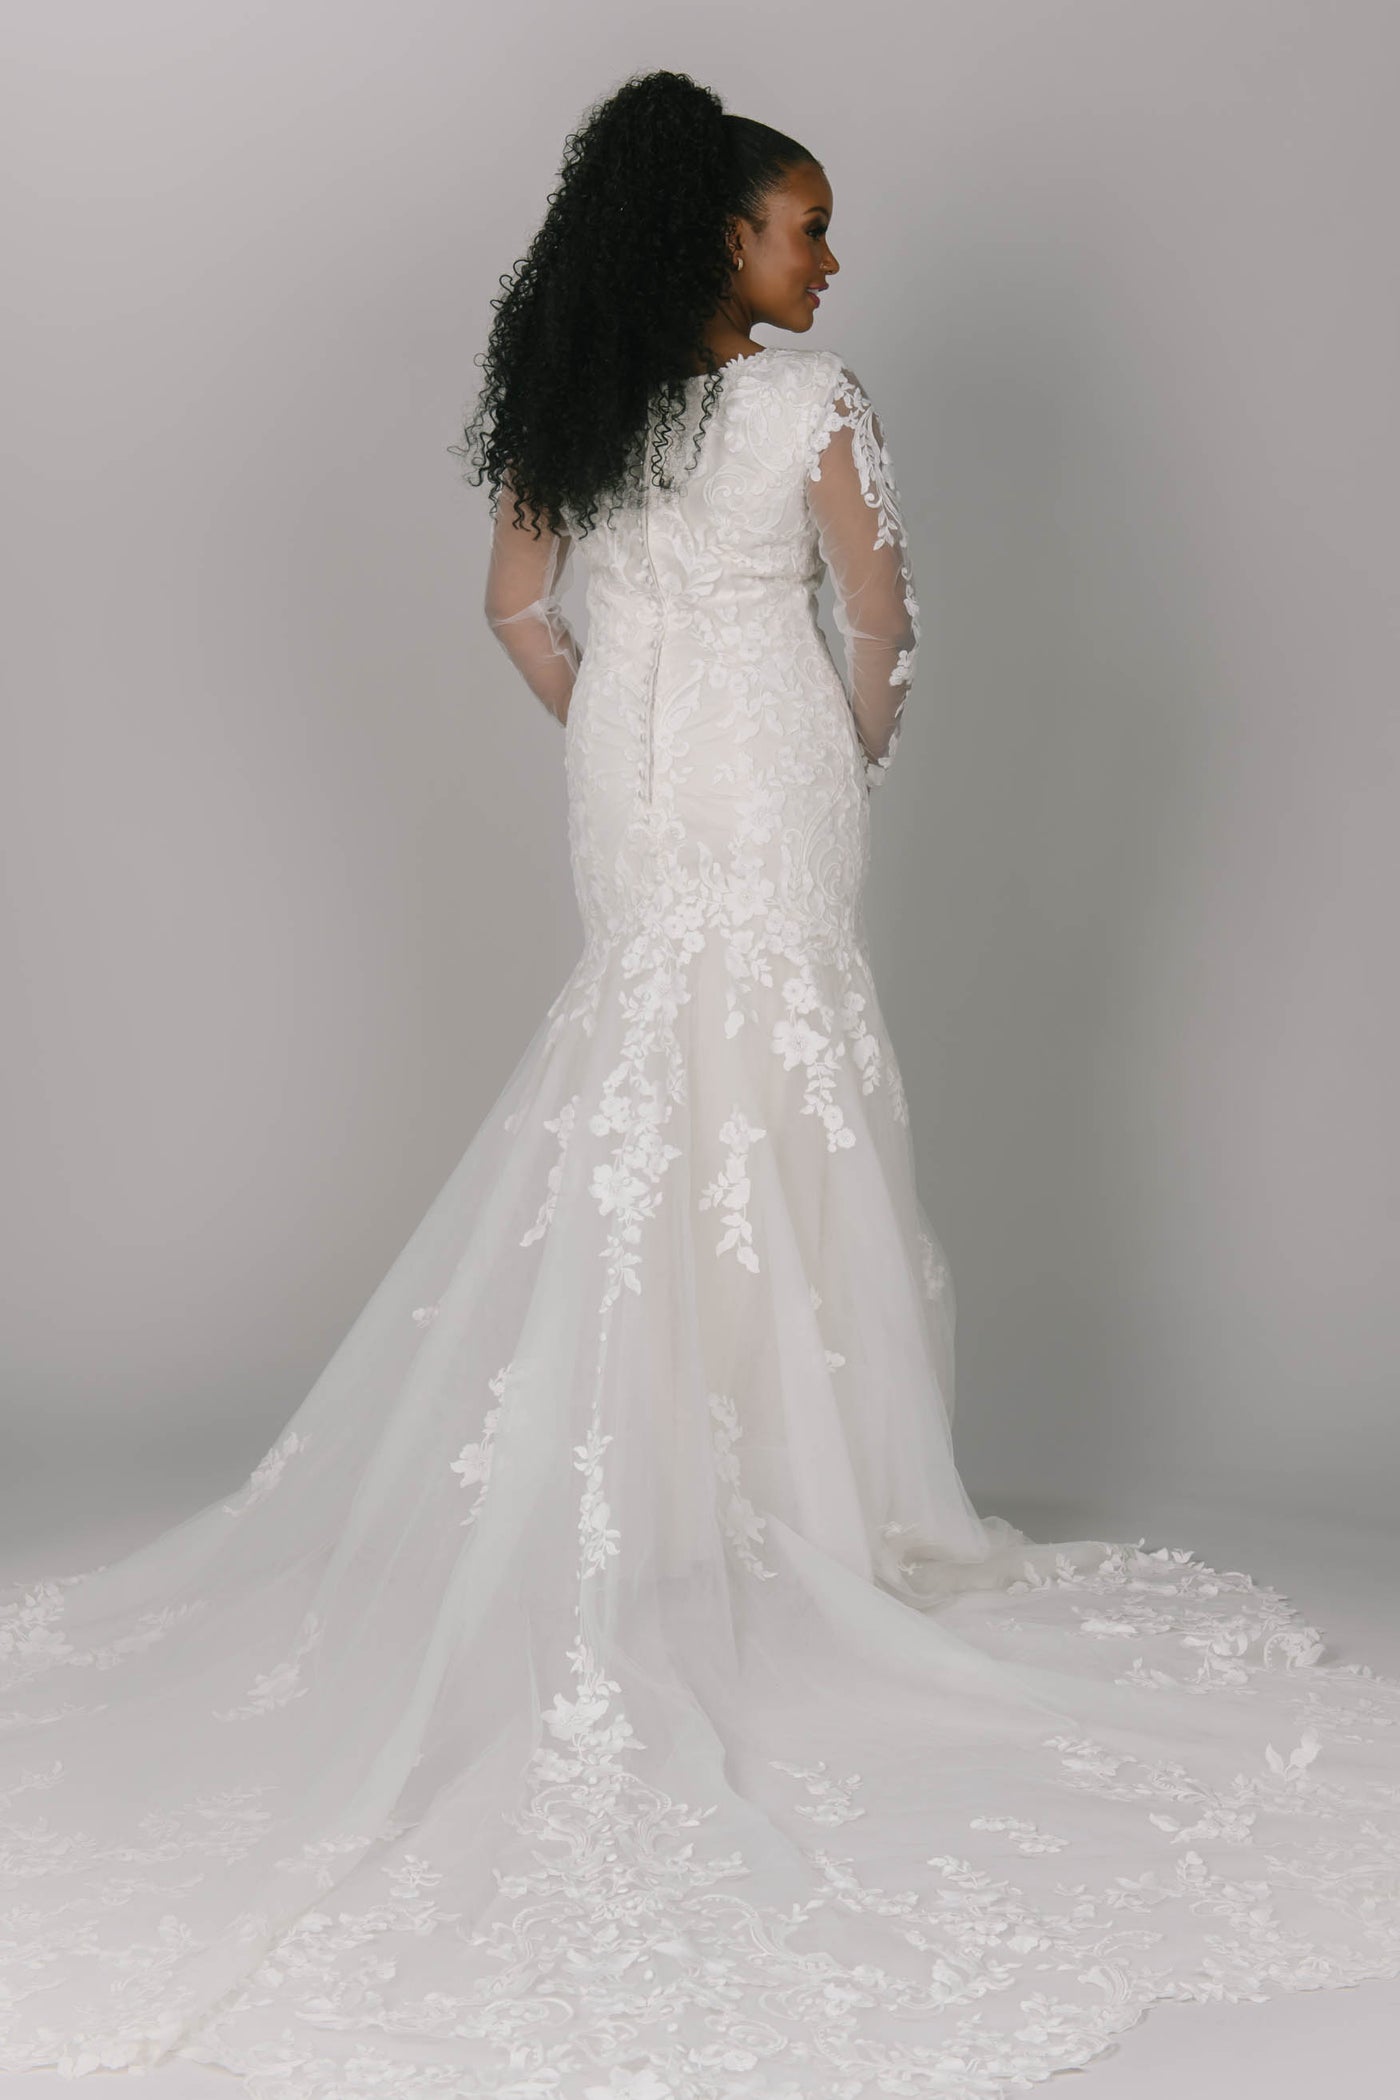 Back view of fitted modest wedding dress. This dress has flower/vine lace which creates a gorgeous lace train. It has long sleeves and a v-neckline.